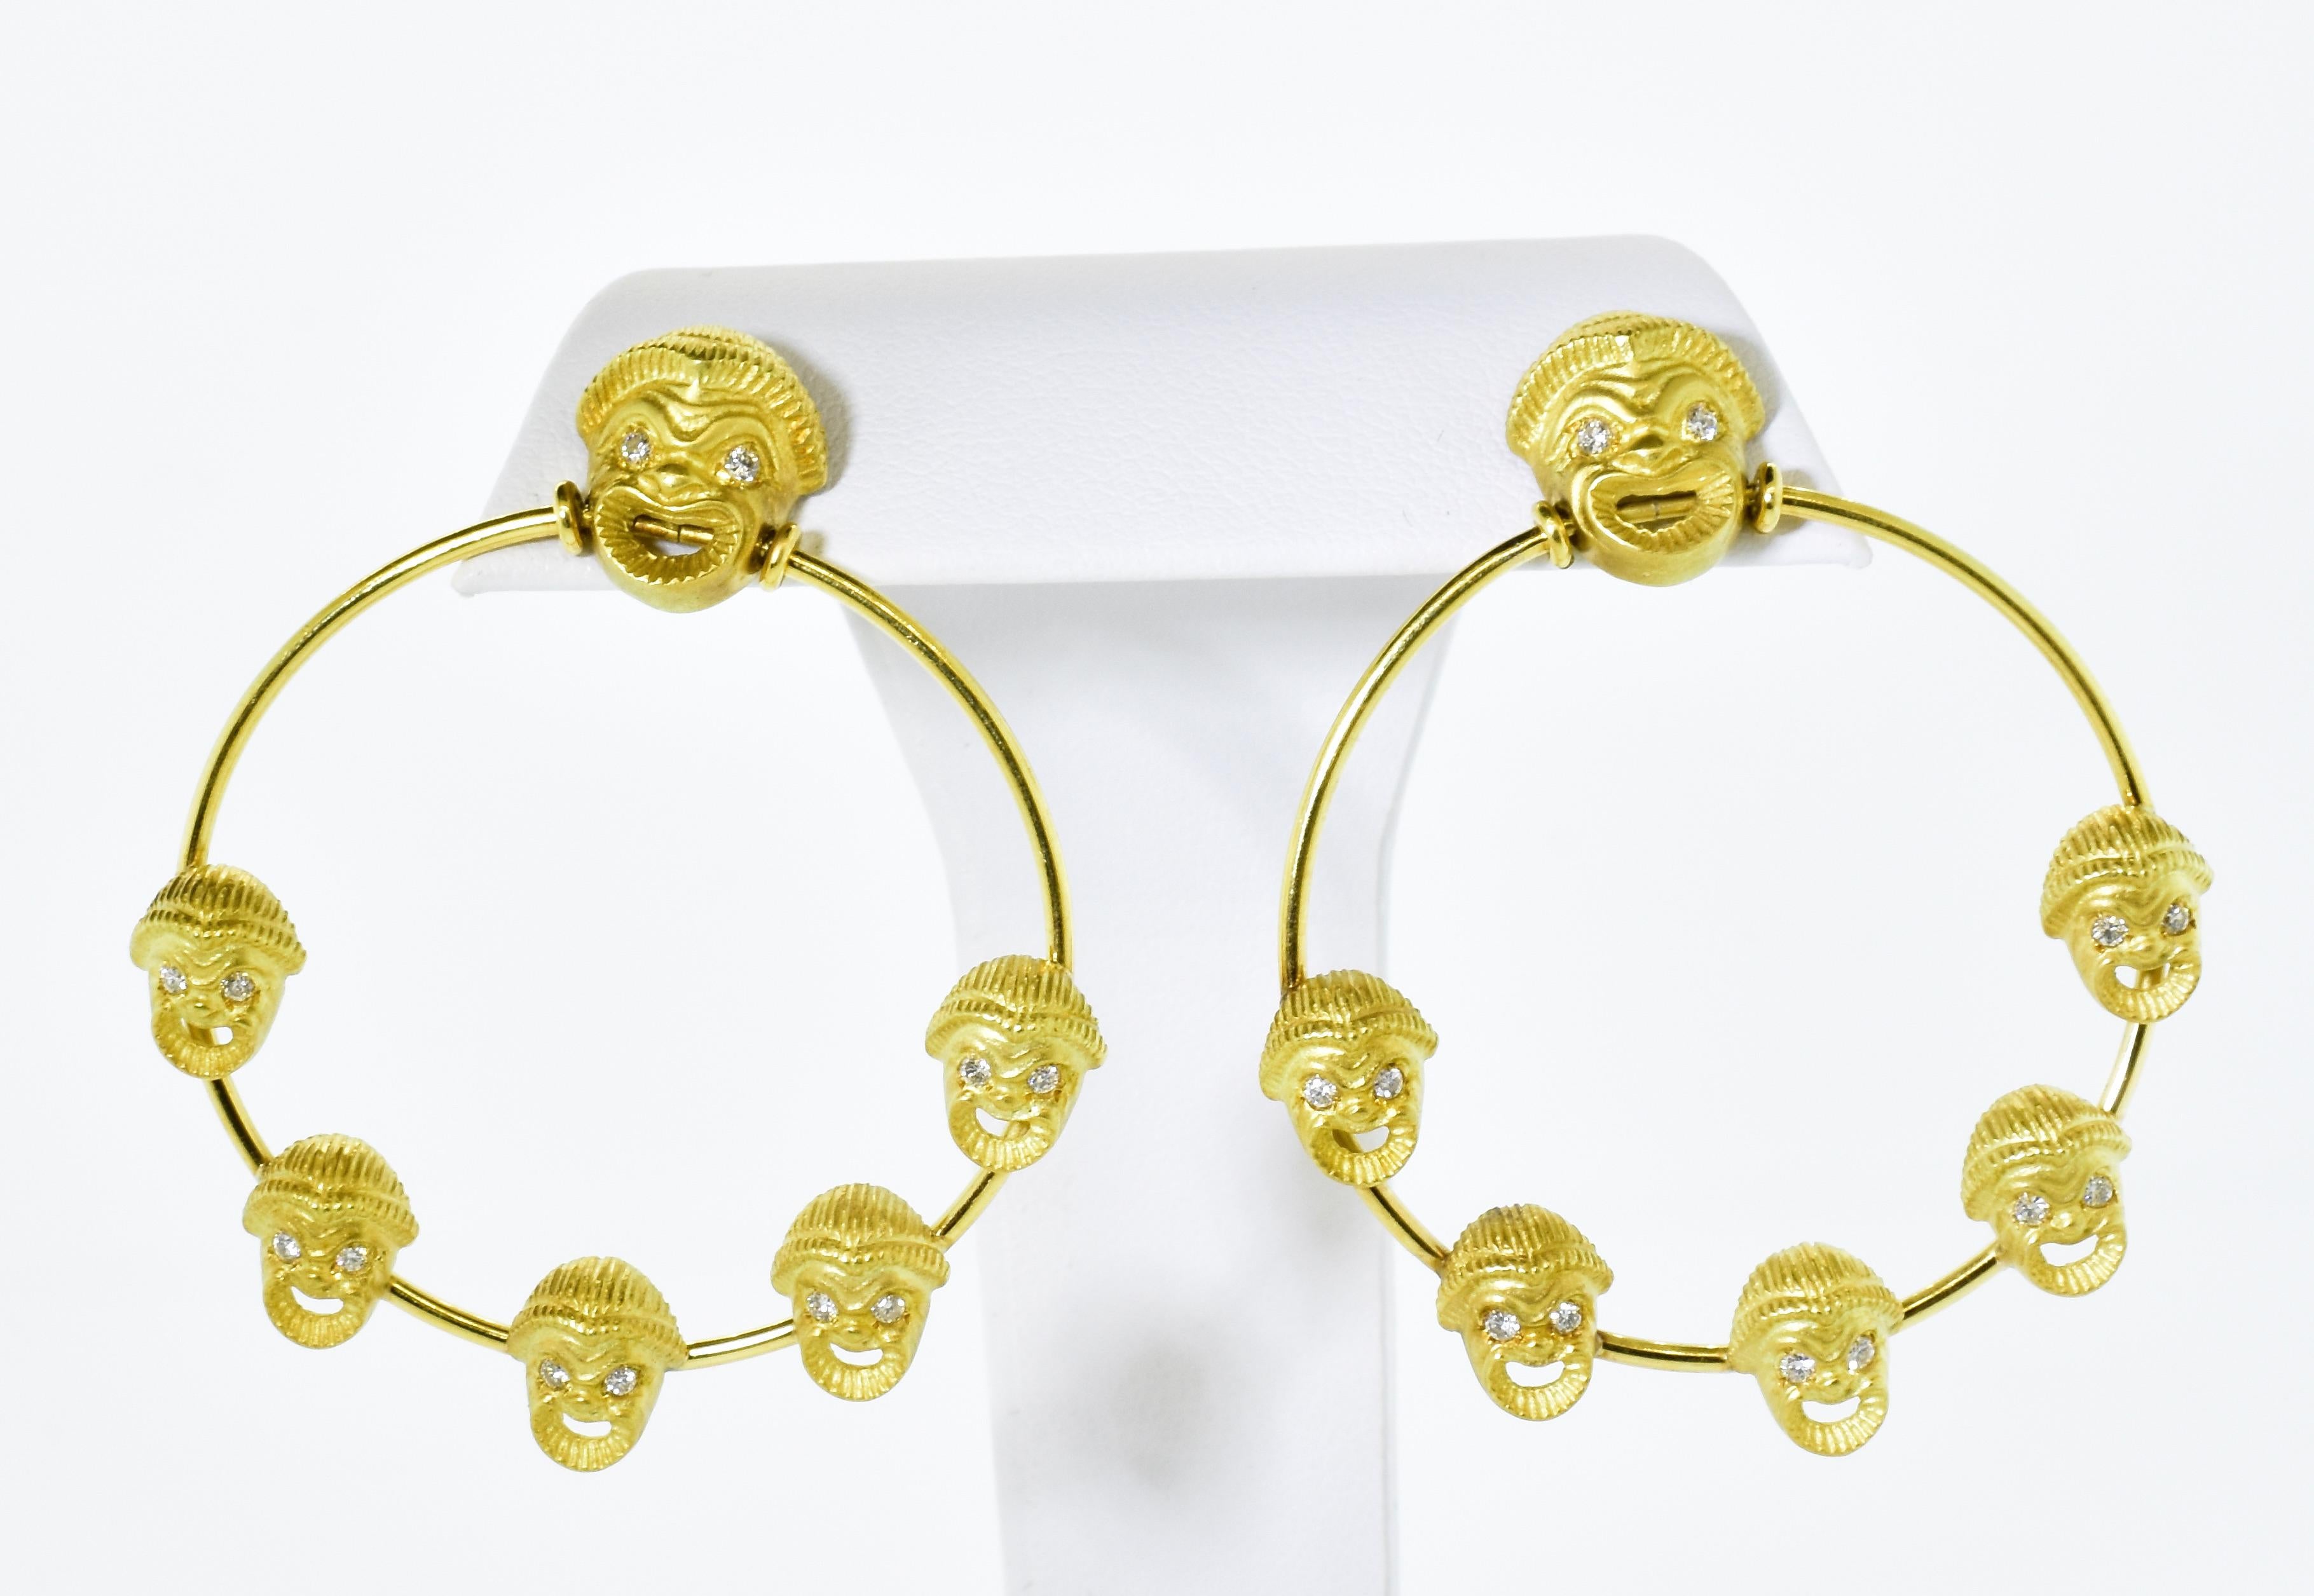 Each of these comedy mask hoop style earrings has 6 masks and each mask is set with diamond eyes - adding an interest to each face.  In all, the diamonds weigh .48 cts.  These diamonds are all brilliant-cut, G/H in color, and very slightly included